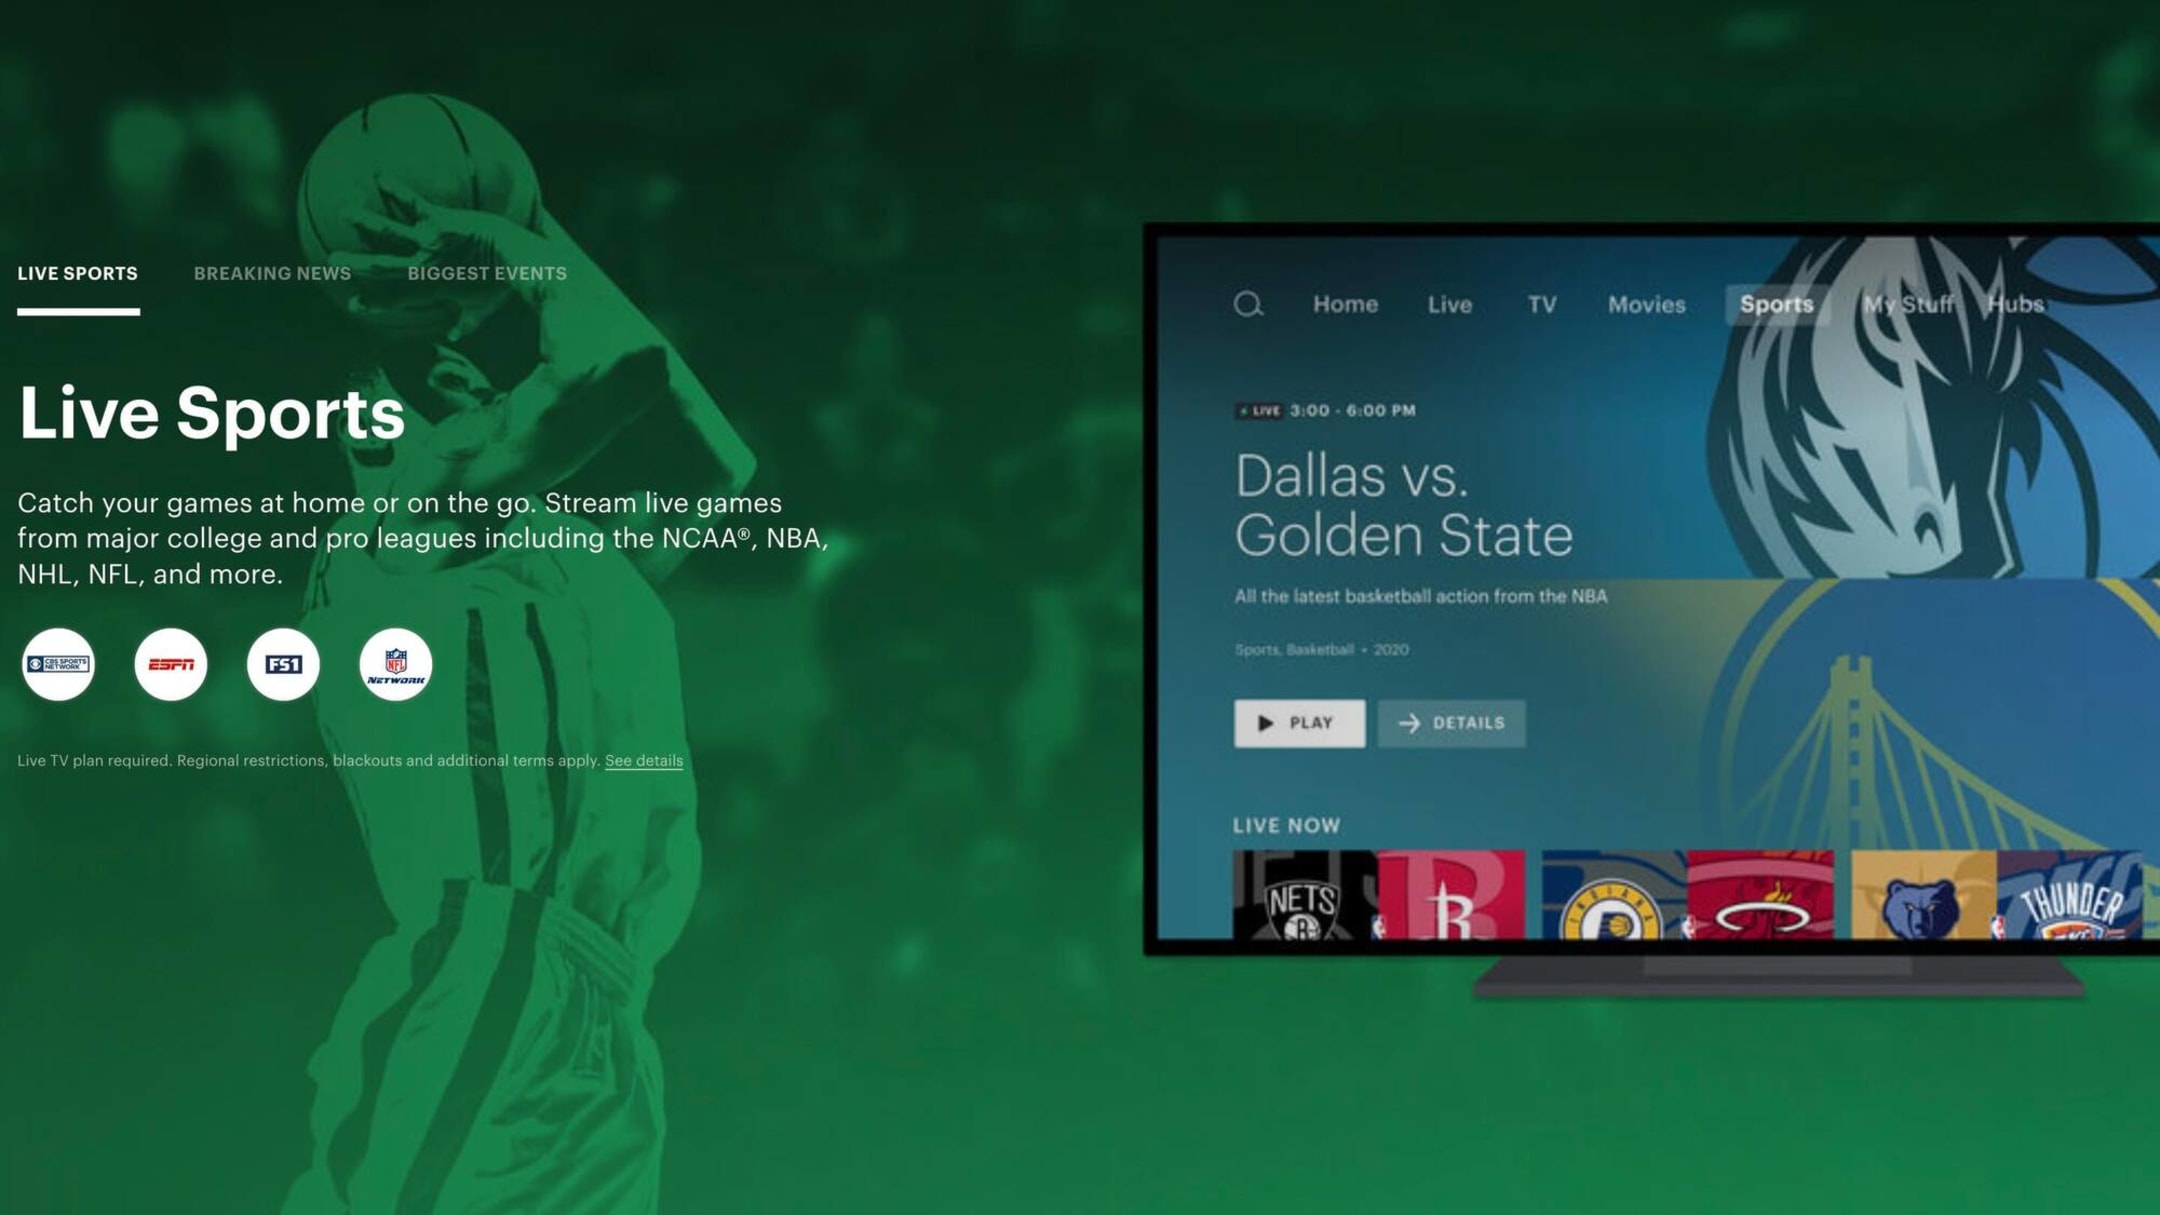 is the cowboys game on hulu today